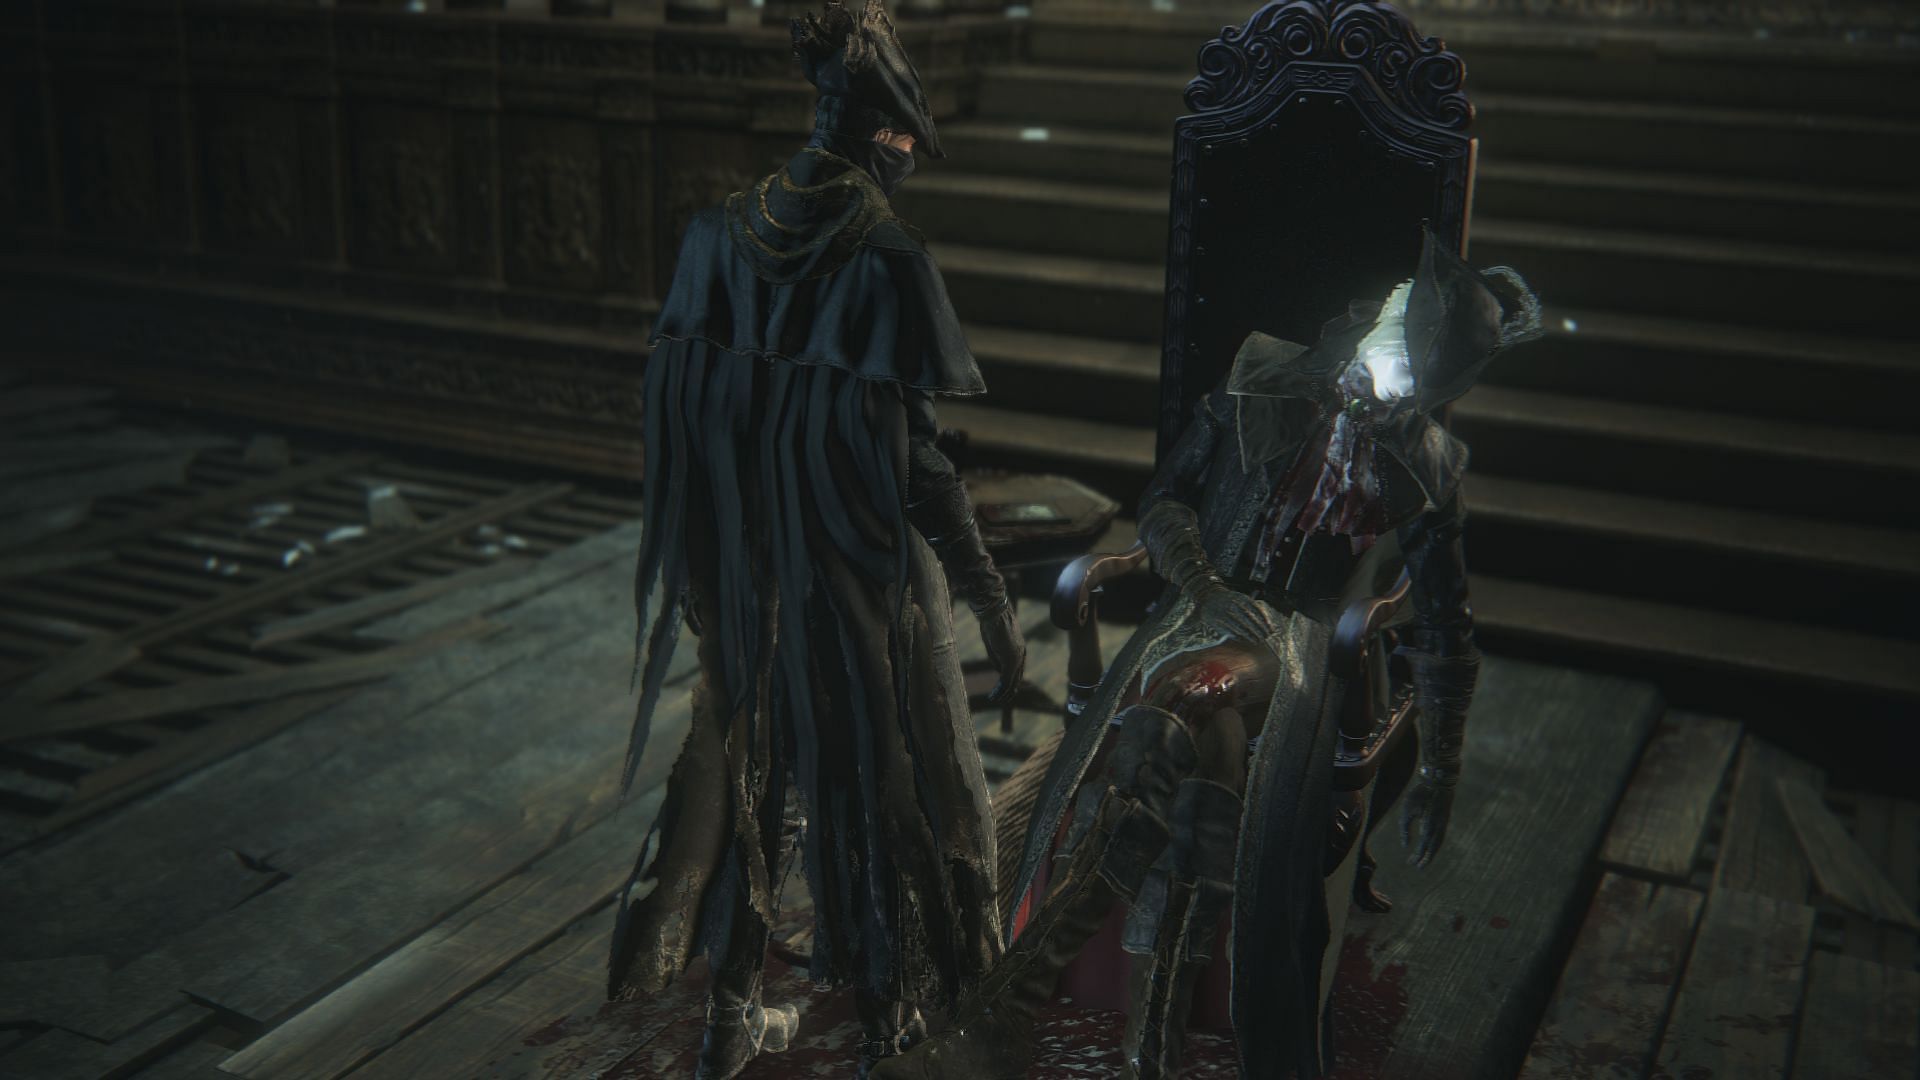 The corpse of Lady Maria (Image via Bloodborne DLC: The Old Hunters)